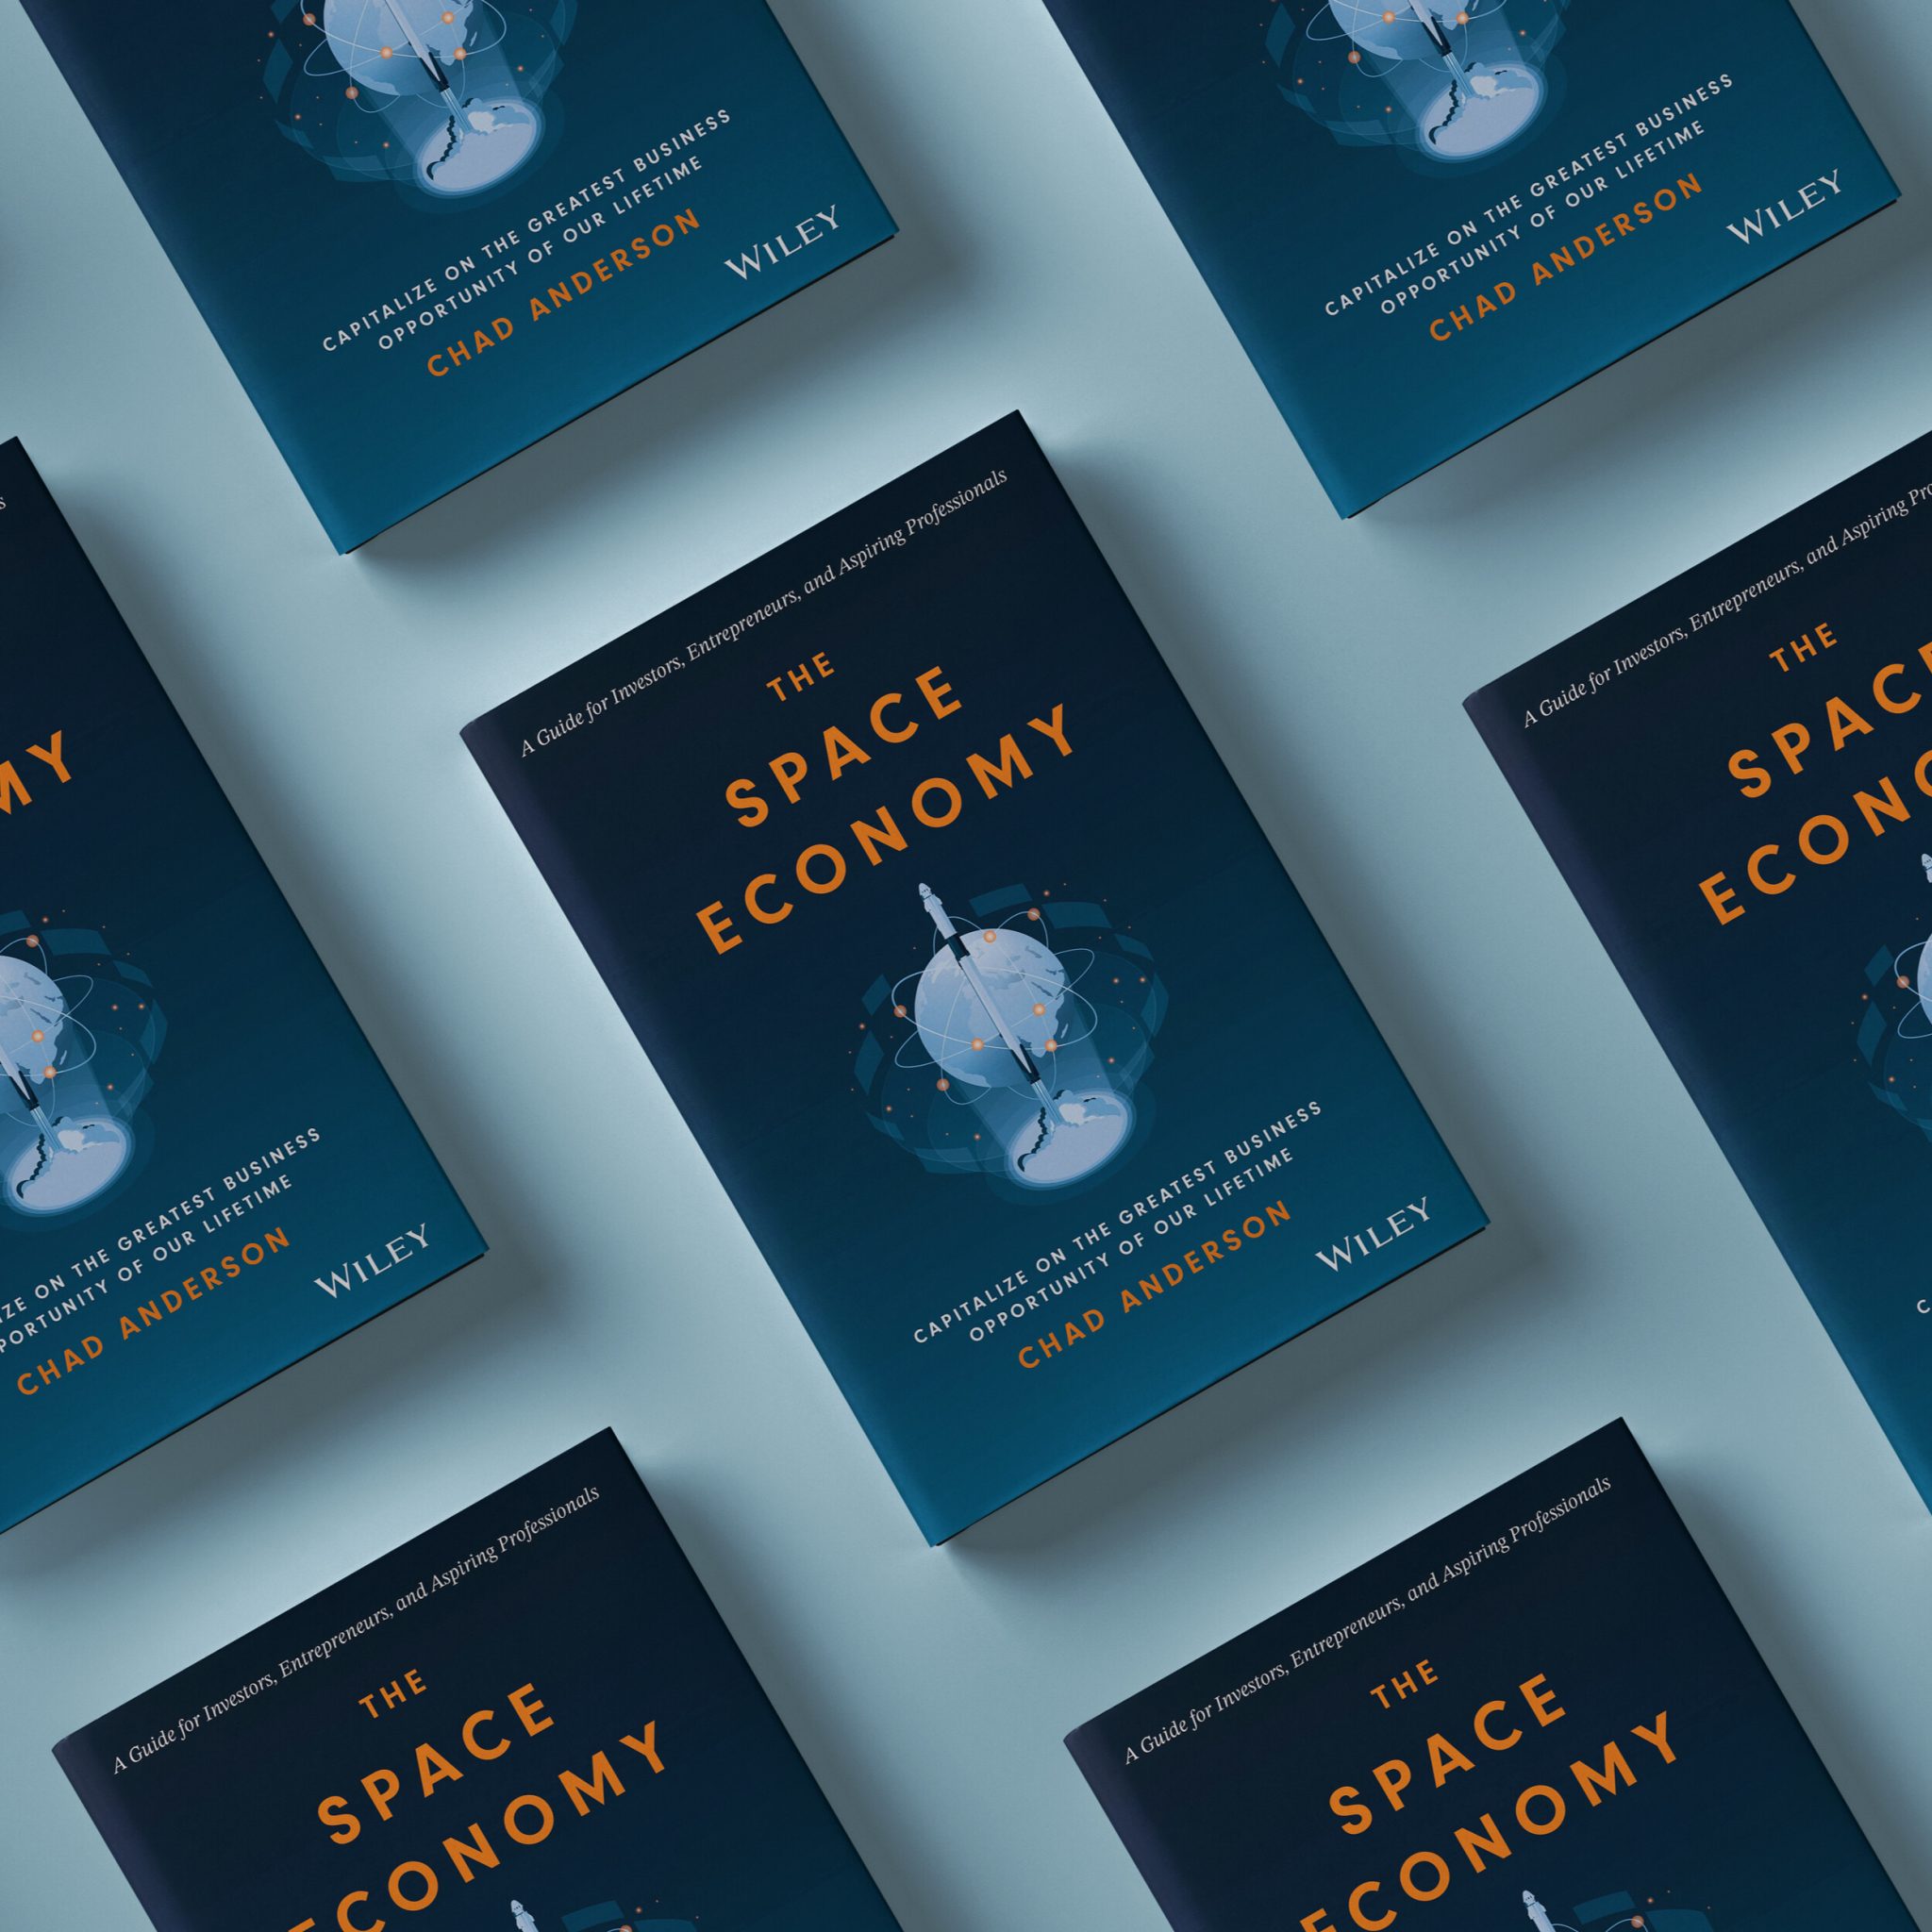 Pattern of The Space Economy book covers repeated on a light blue background.